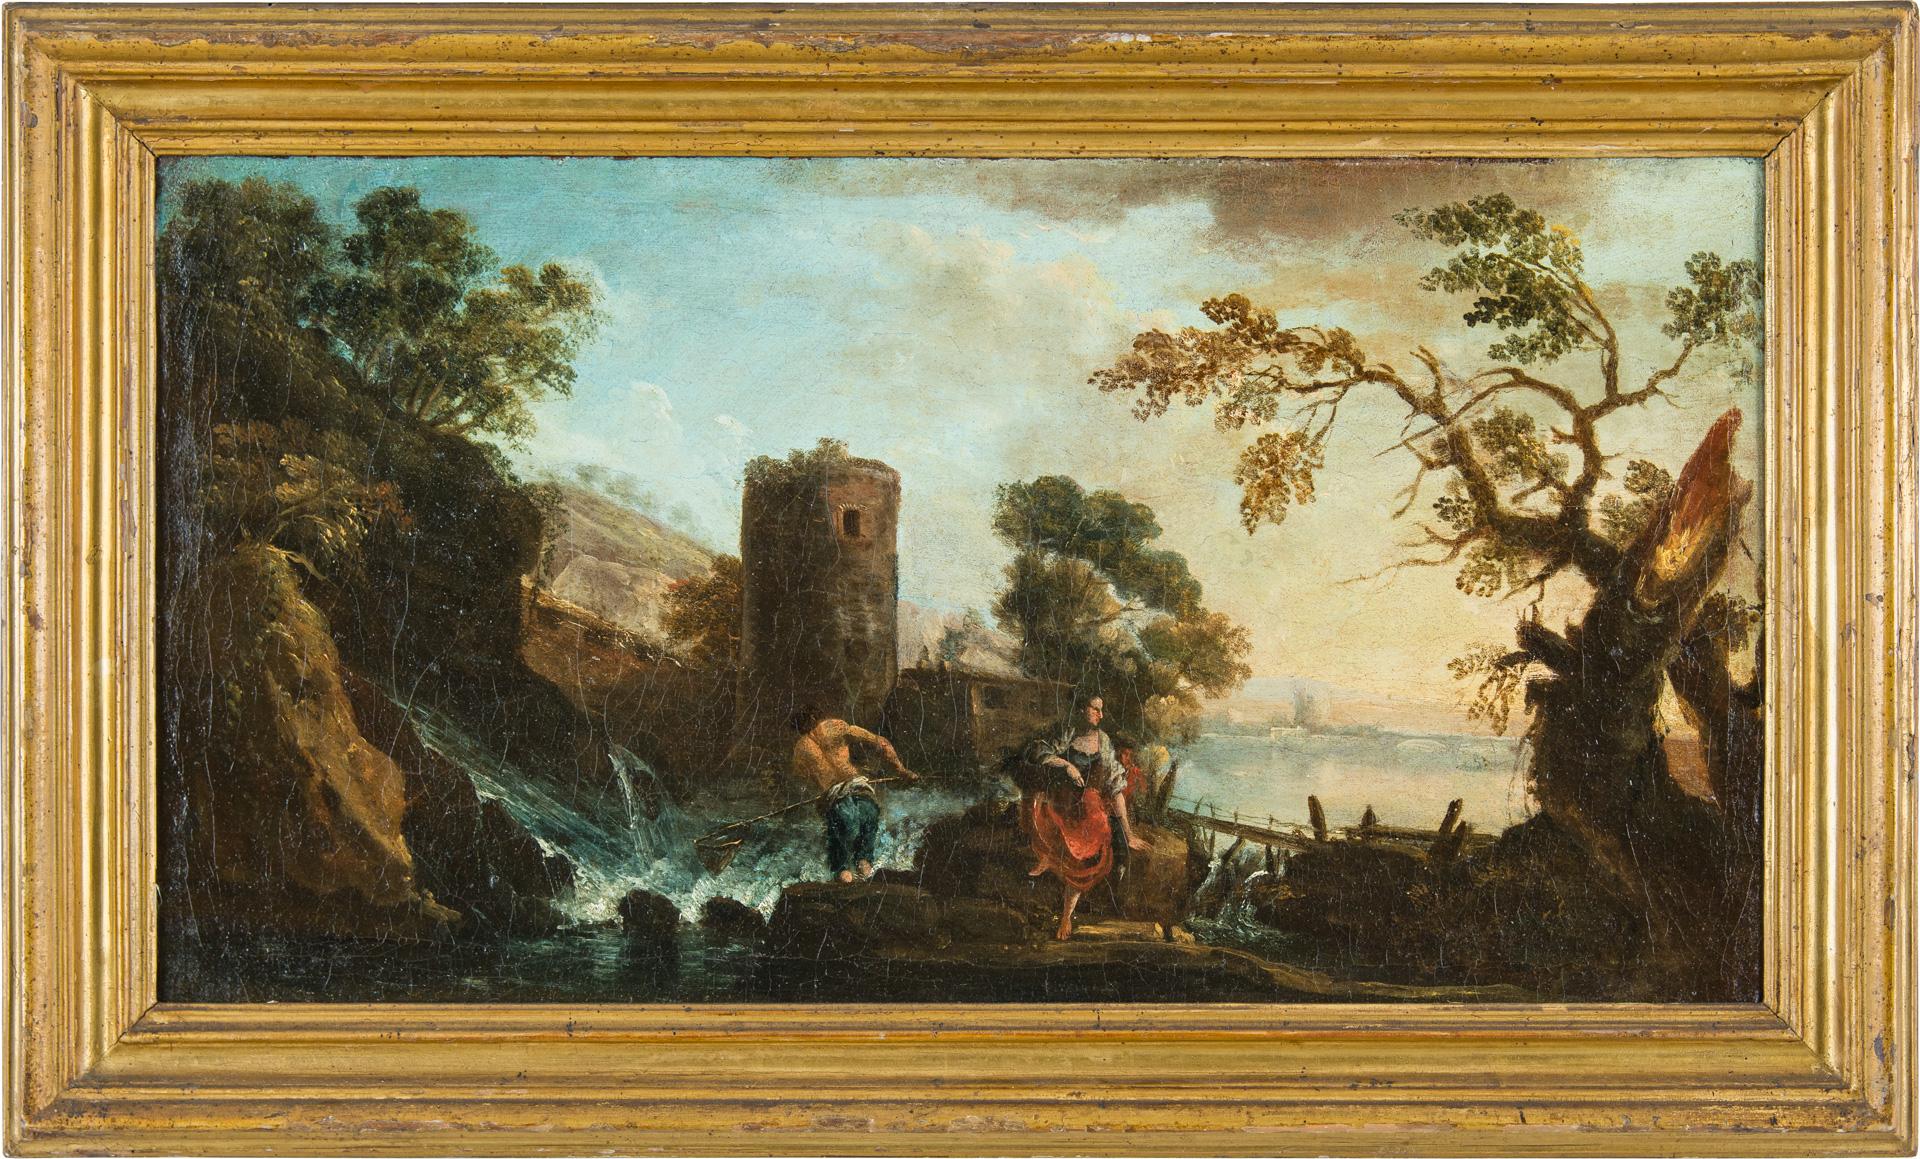 18th century Venetian lanscape painting - Zuccarelli - Oil on canvas Tower 